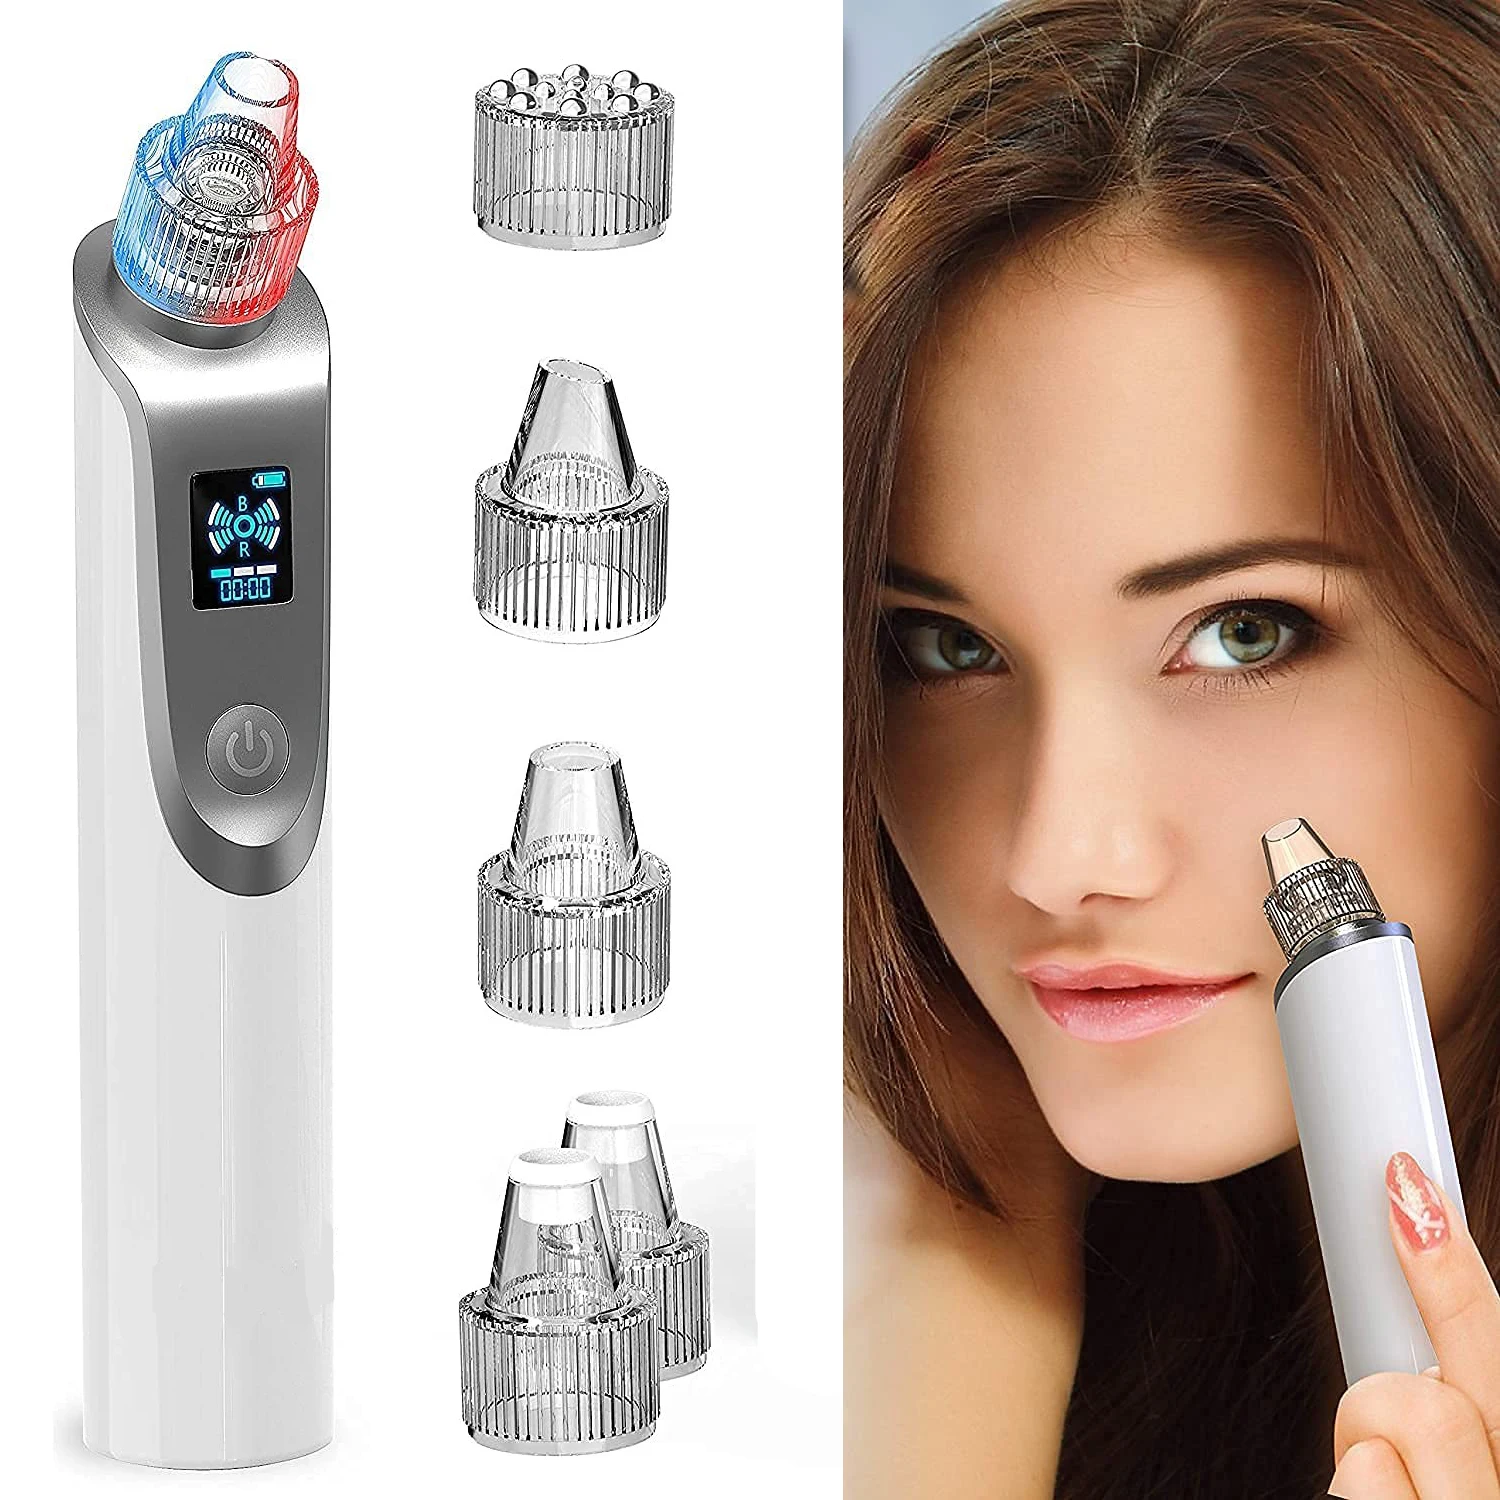 

Blackhead Remover – Electric Vacuum Suction w/LED Display – Powerful Acne & Pore Cleanser 5 Suction Heads Black Heads Extraction